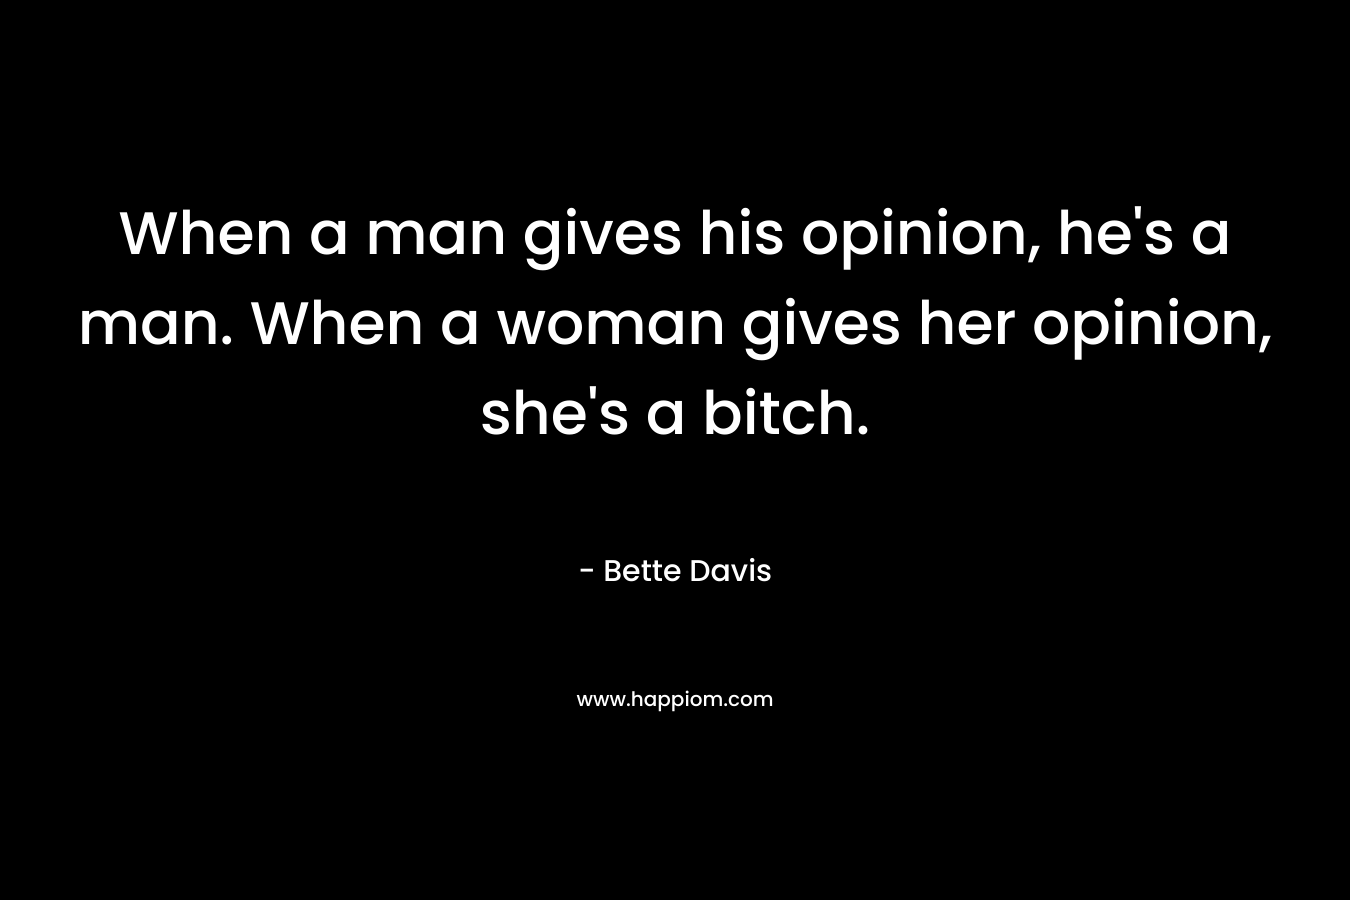 When a man gives his opinion, he's a man. When a woman gives her opinion, she's a bitch.